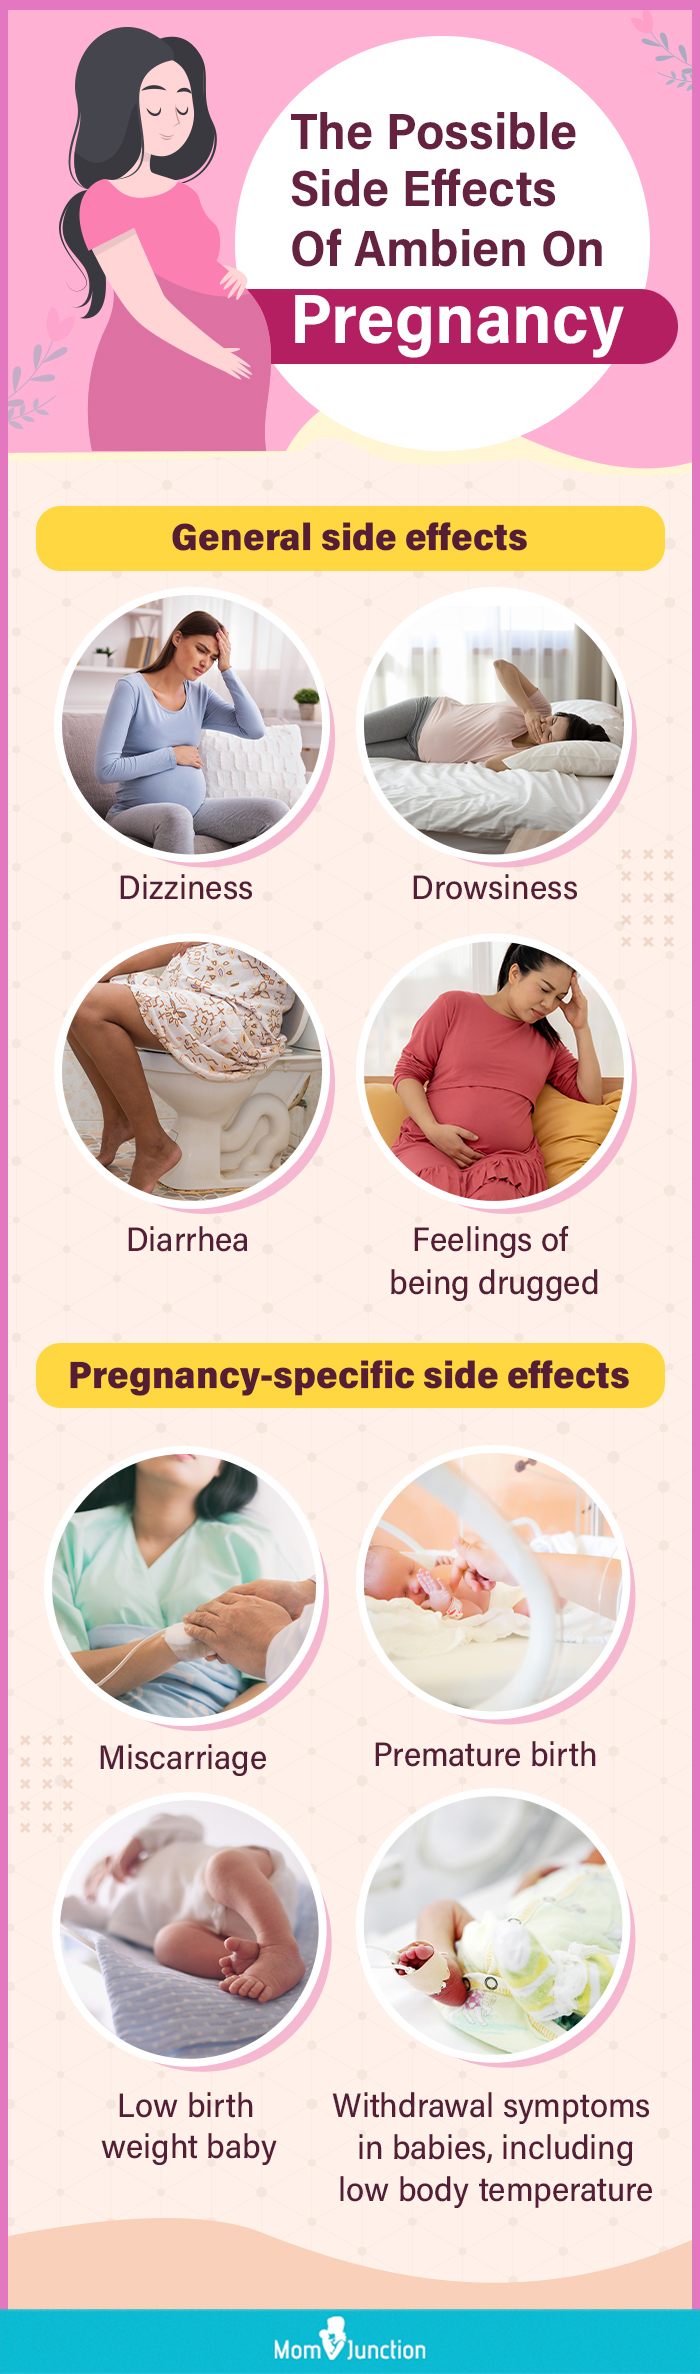 Bloating And Gas During Pregnancy: Causes And Home Remedies